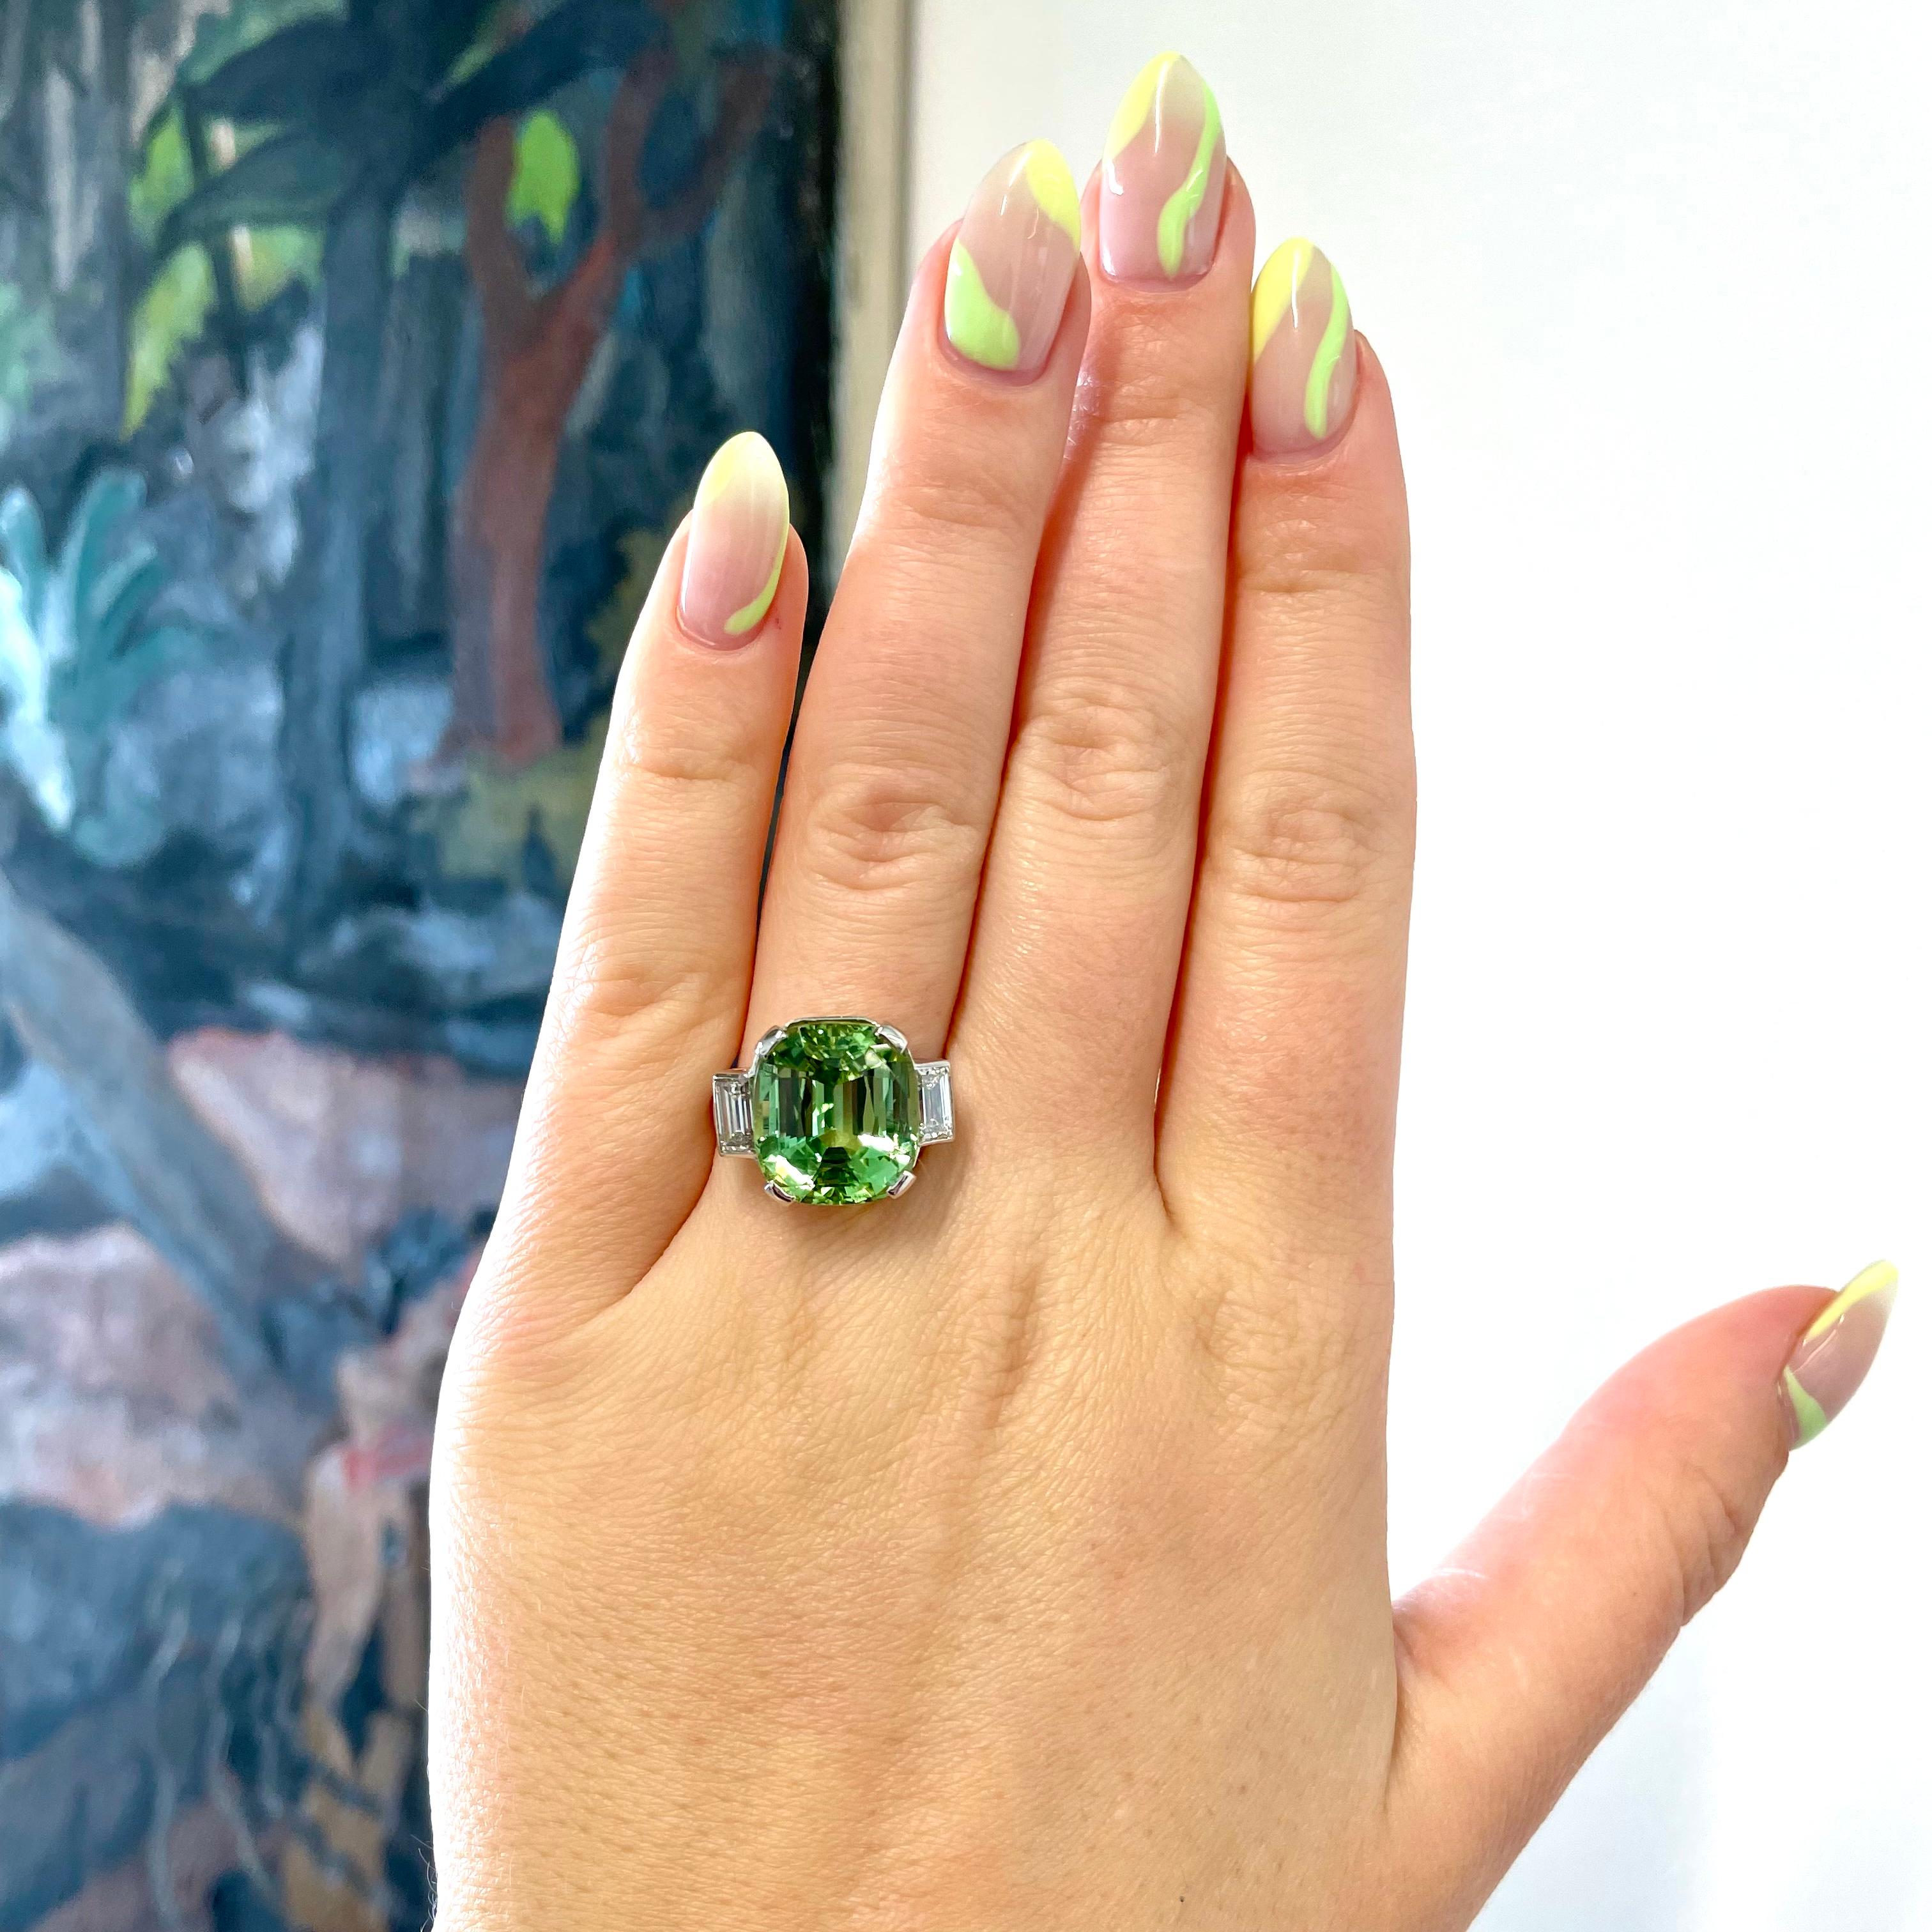 Retro Mint Green Tourmaline Diamond Cocktail Ring. The ring feature a vibrant peridot weighs 11.36 carats. Accented by 2 baguette cut diamonds approximately, 0.80 carat, H-I color, VS clarity. Circa 1950's. Size 5 1/2 and can be resized. 

About The